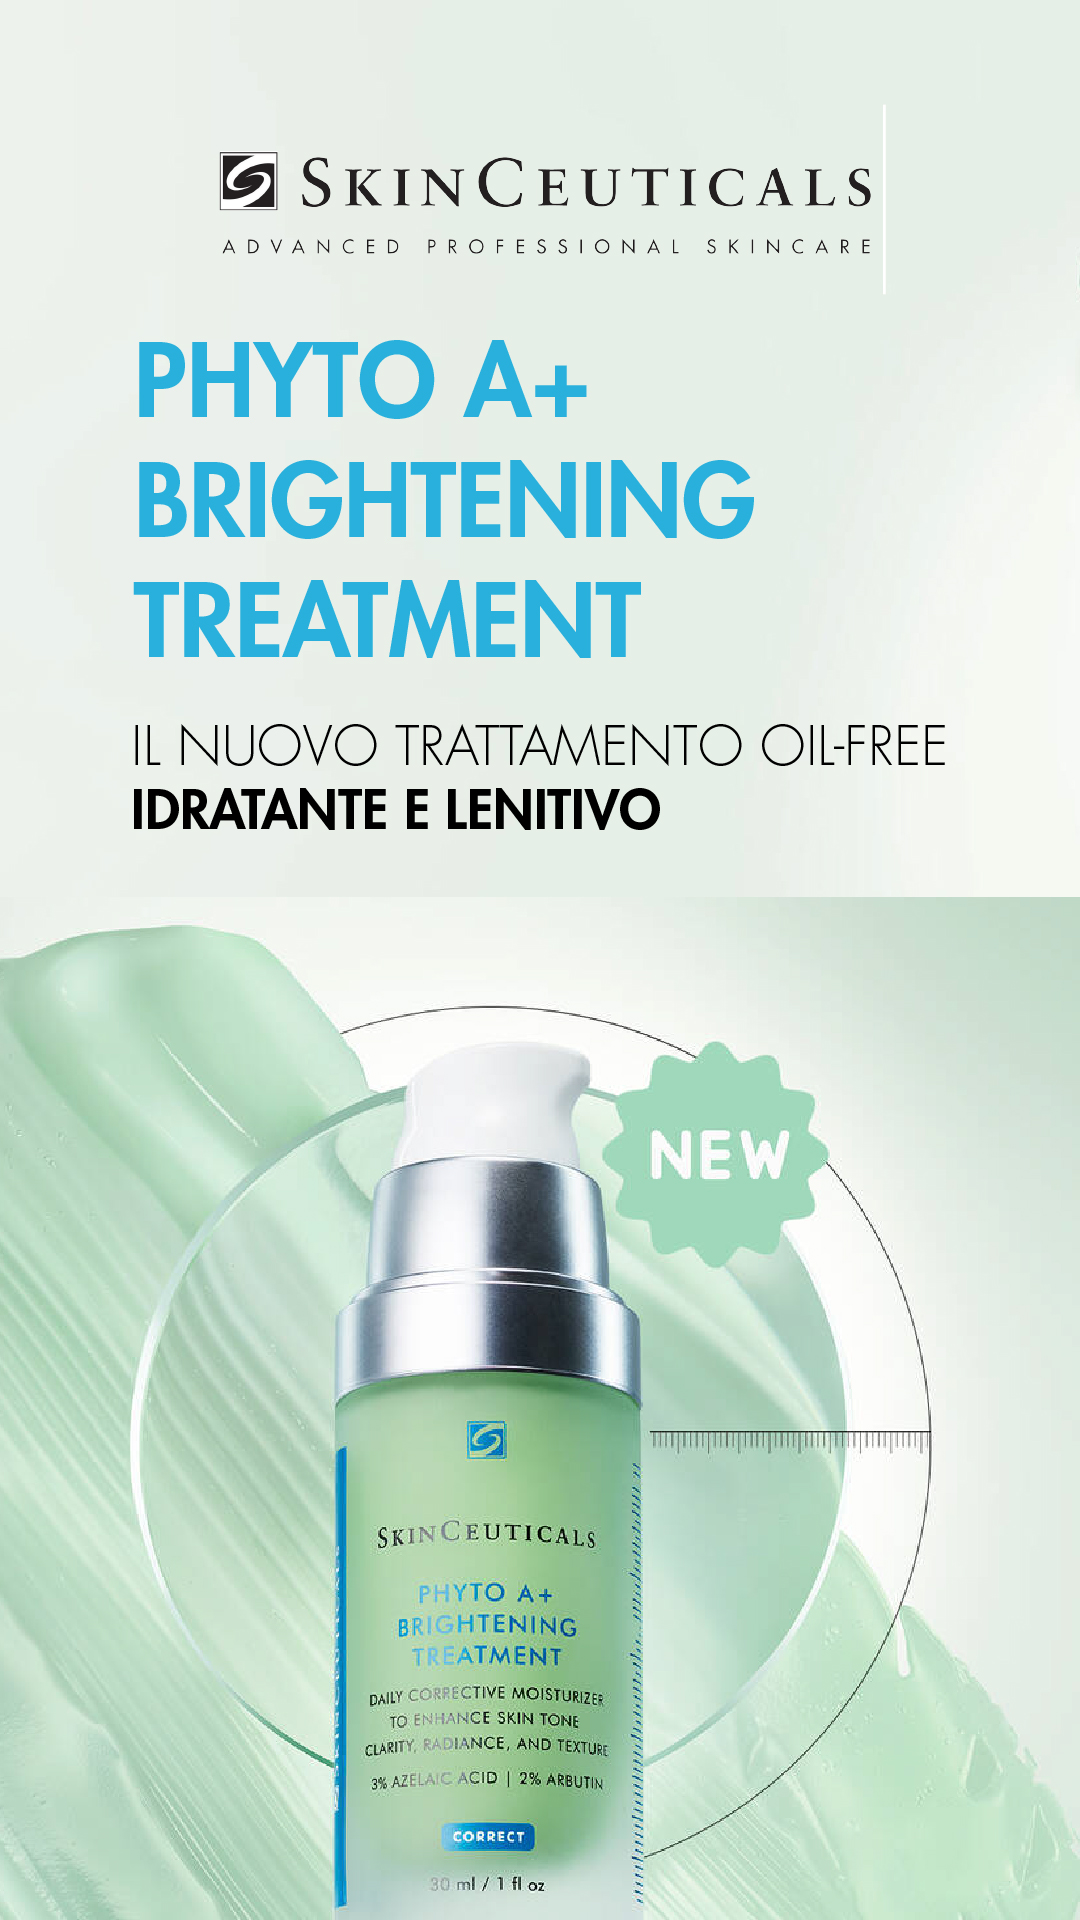 V SKINCEUTICALS PHYTO A+ BRIGHTENING TREATMENT